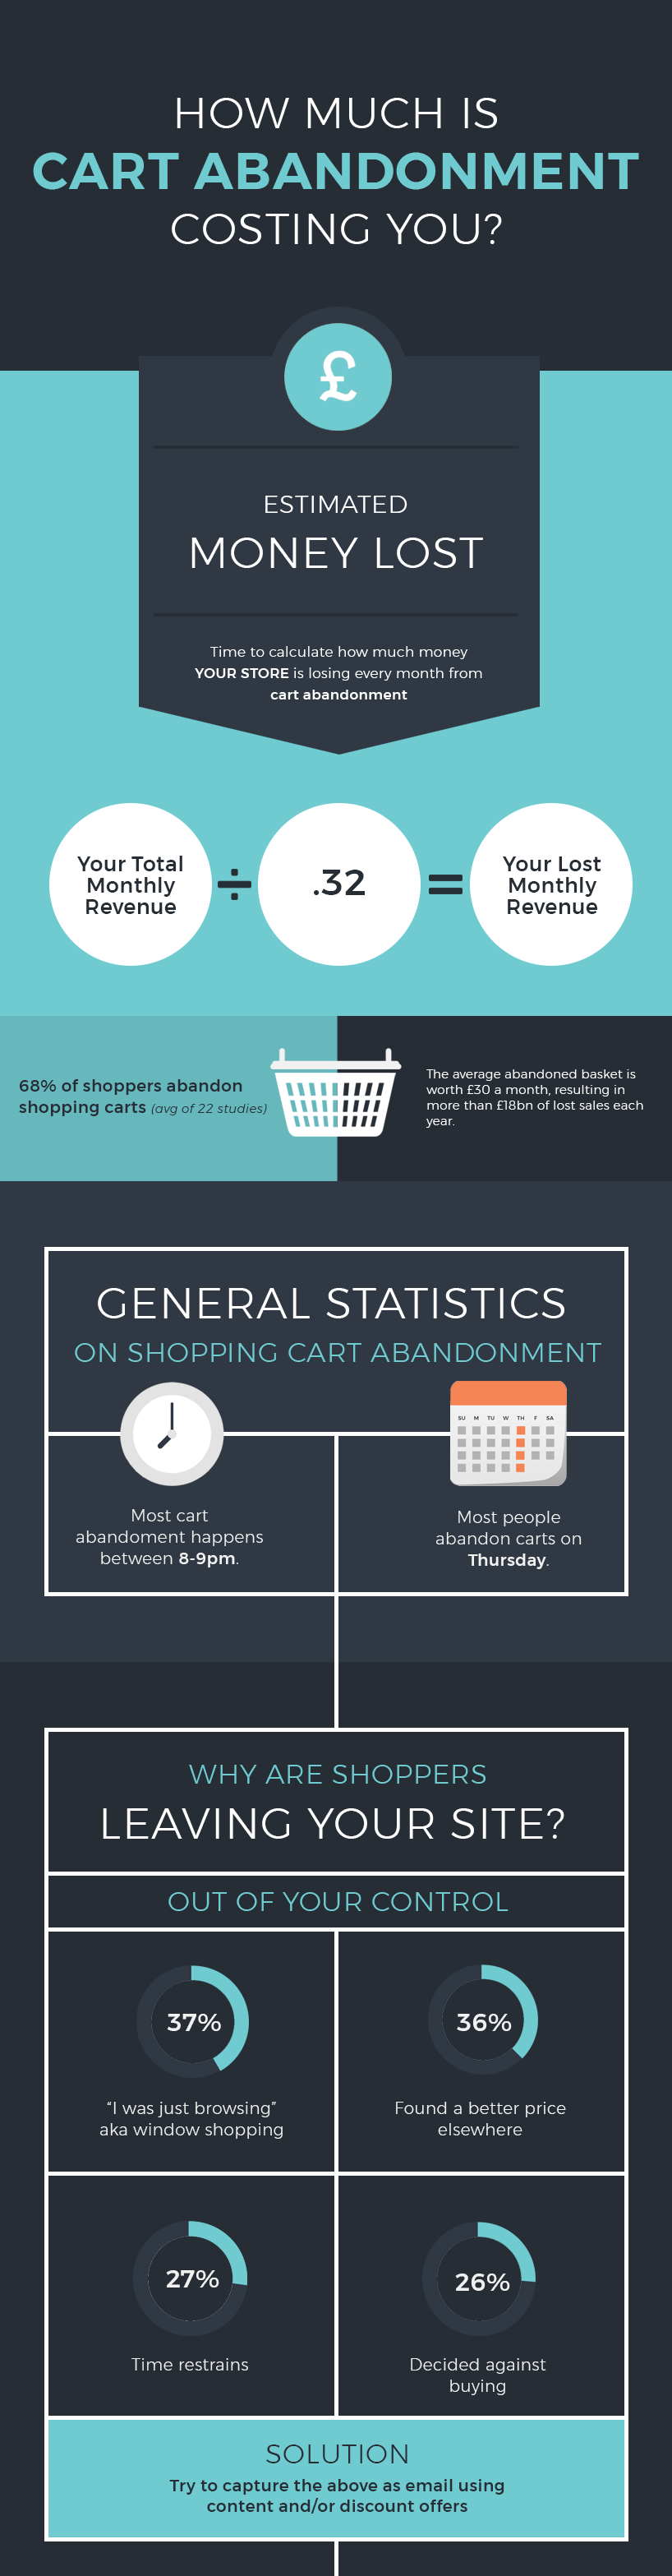 Ecommerce cart abandonment why shoppers leave your site how to keep them 1 2